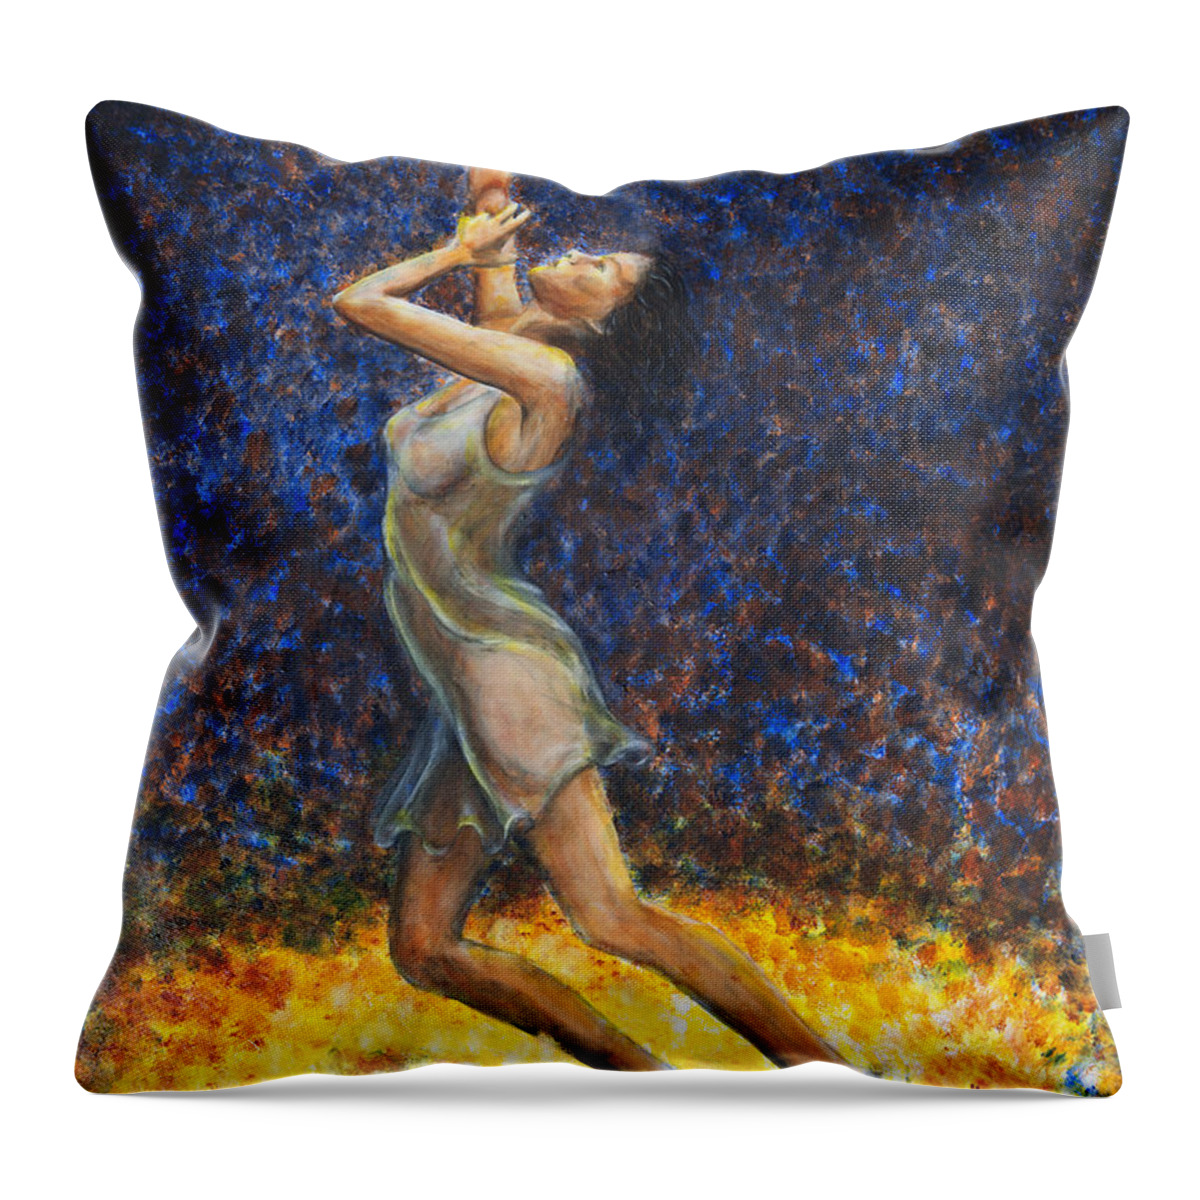 Dancer Throw Pillow featuring the painting Dancer X by Nik Helbig